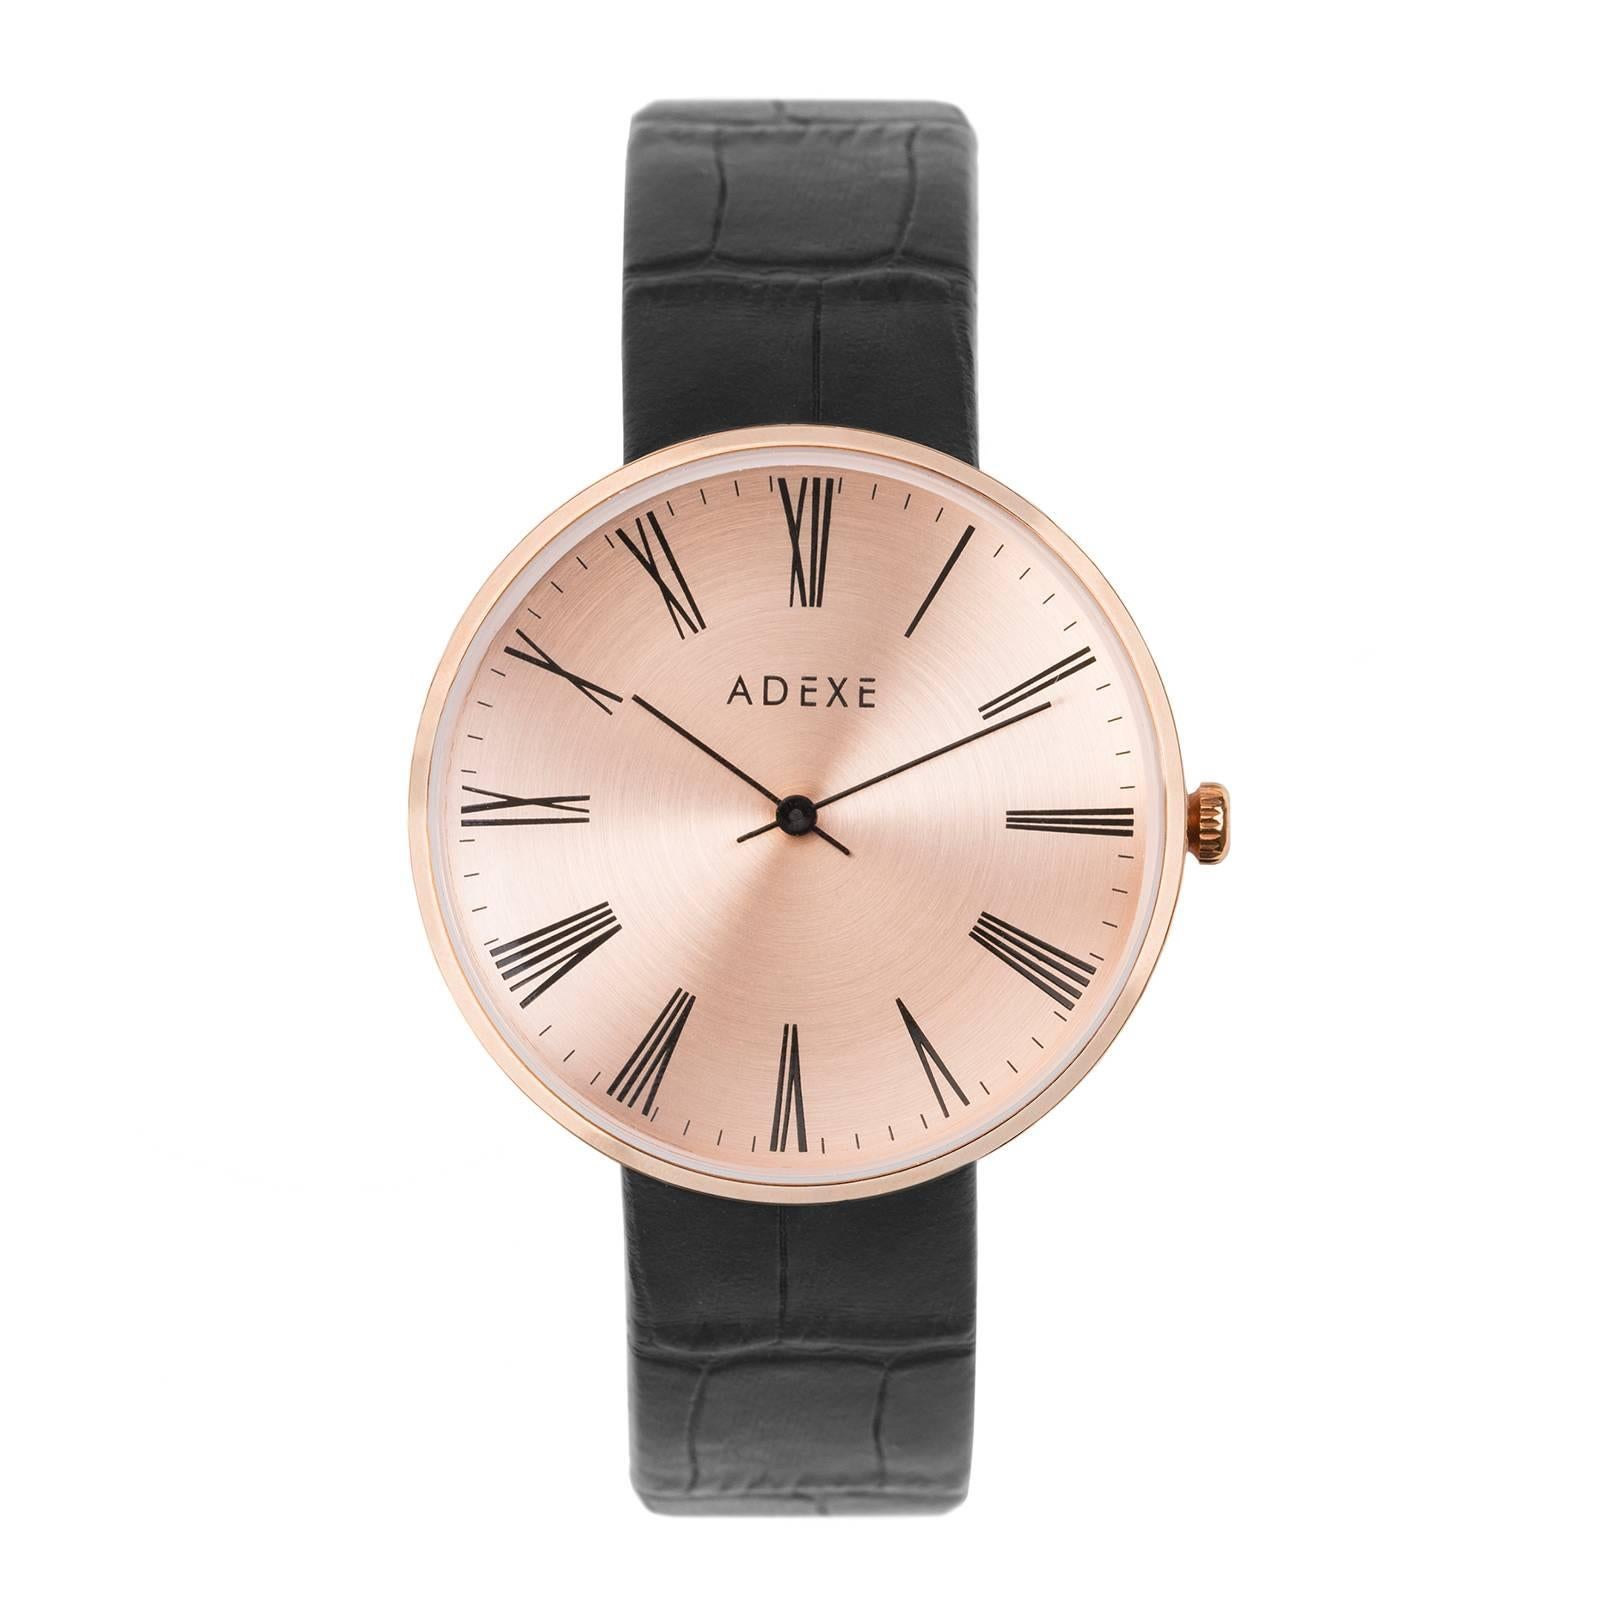 ADEXE Sistine Black and Rose Gold Convex Dial Quartz Wristwatch For Sale